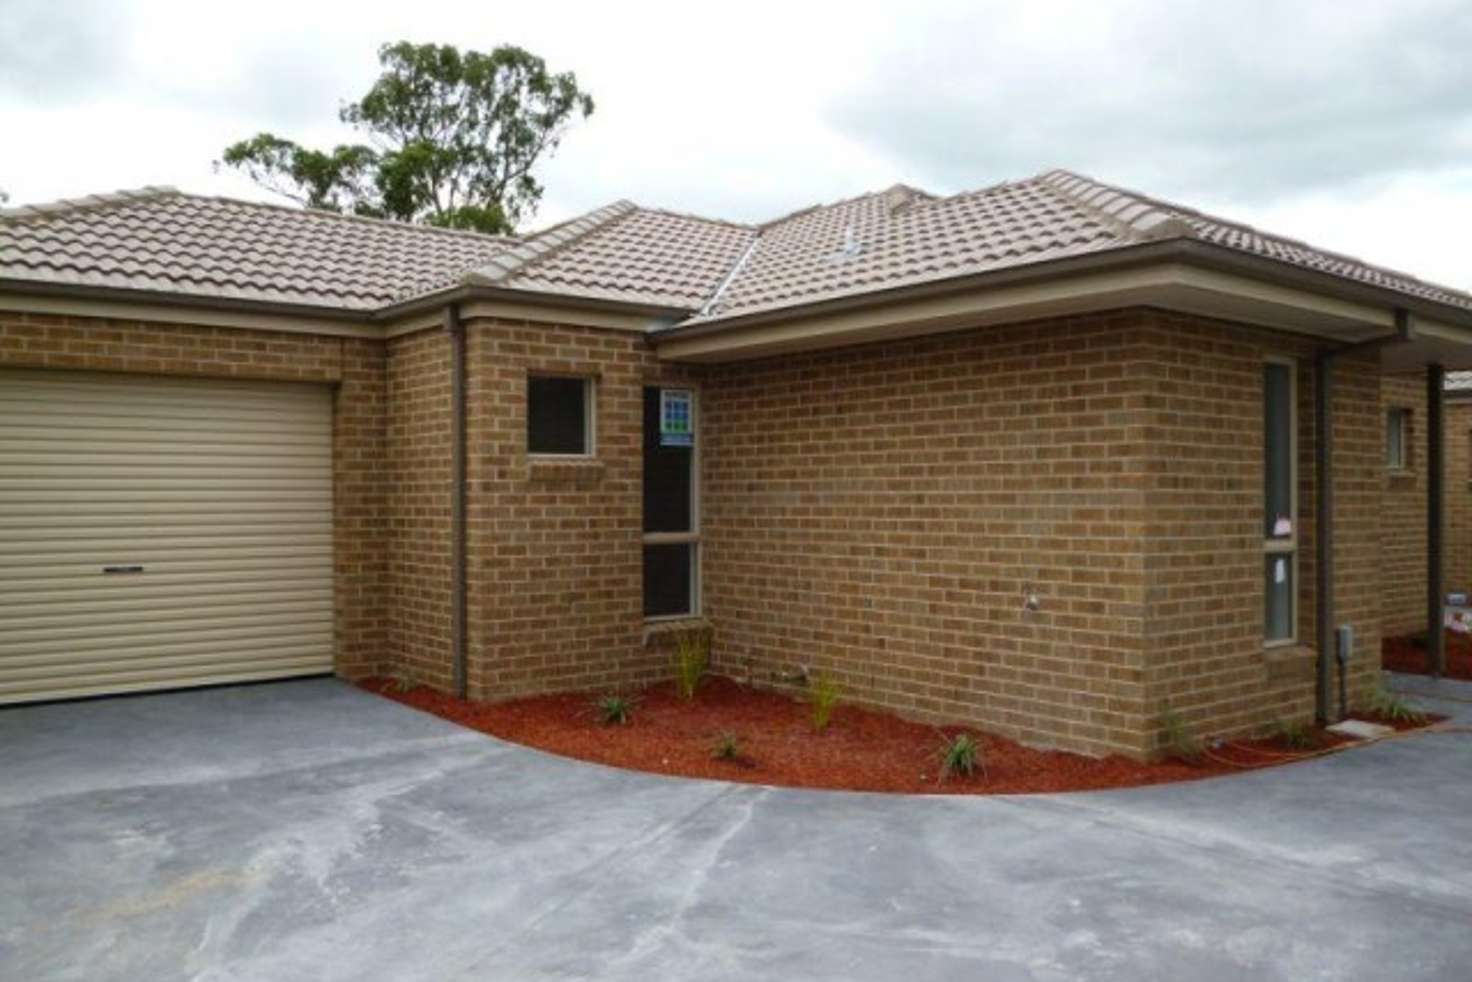 Main view of Homely unit listing, 2/109 Schotters Road, Mernda VIC 3754